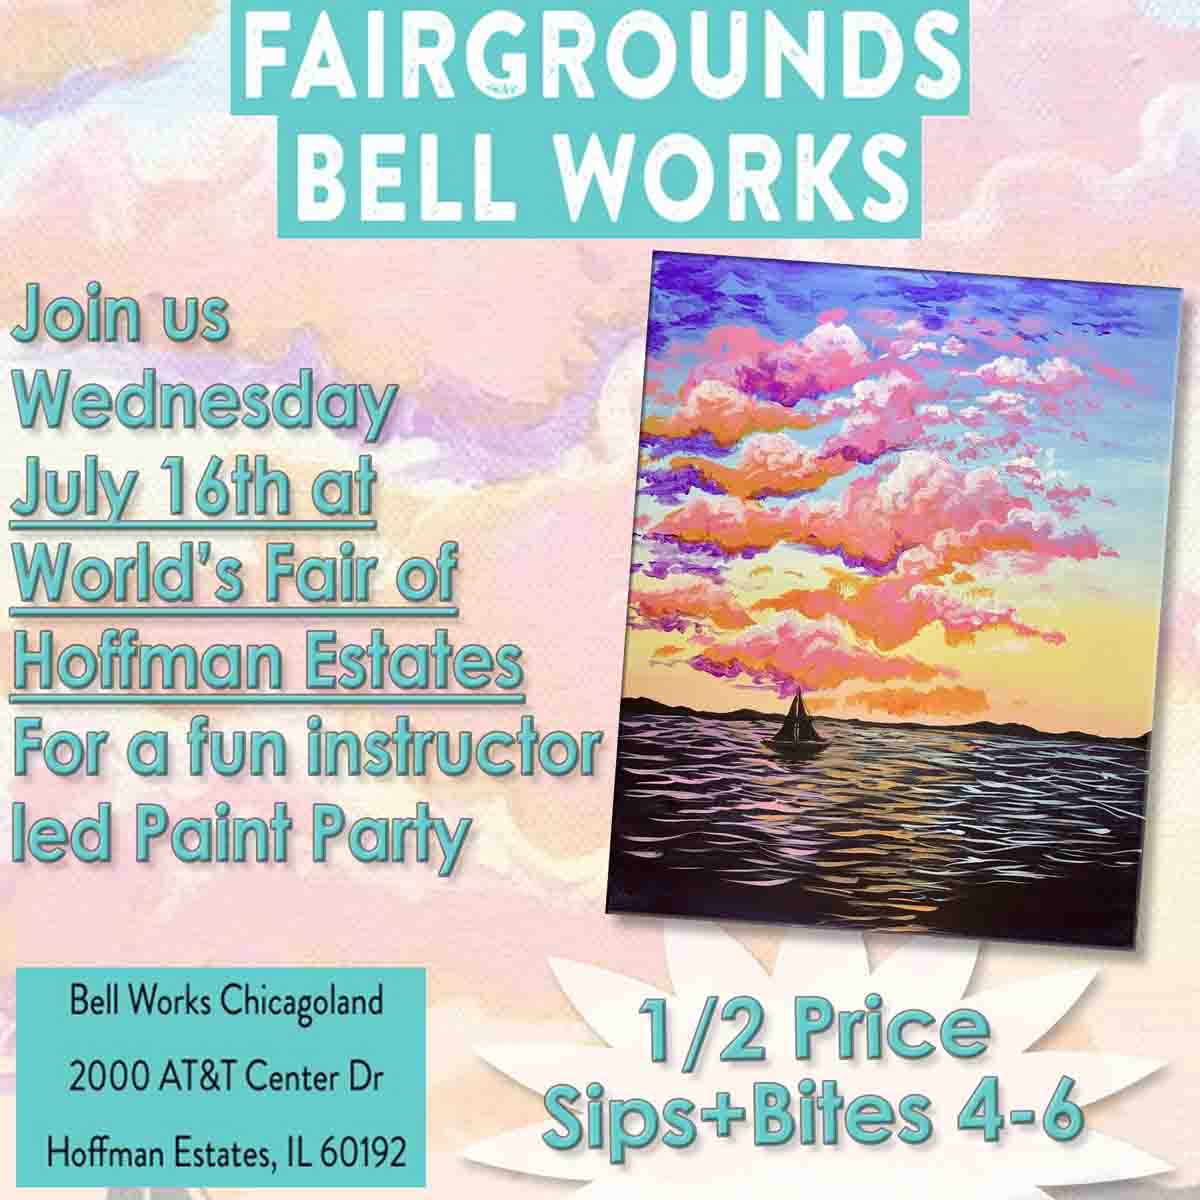 Paint + Sip inside World's Fair at Bell Works Chicagoland